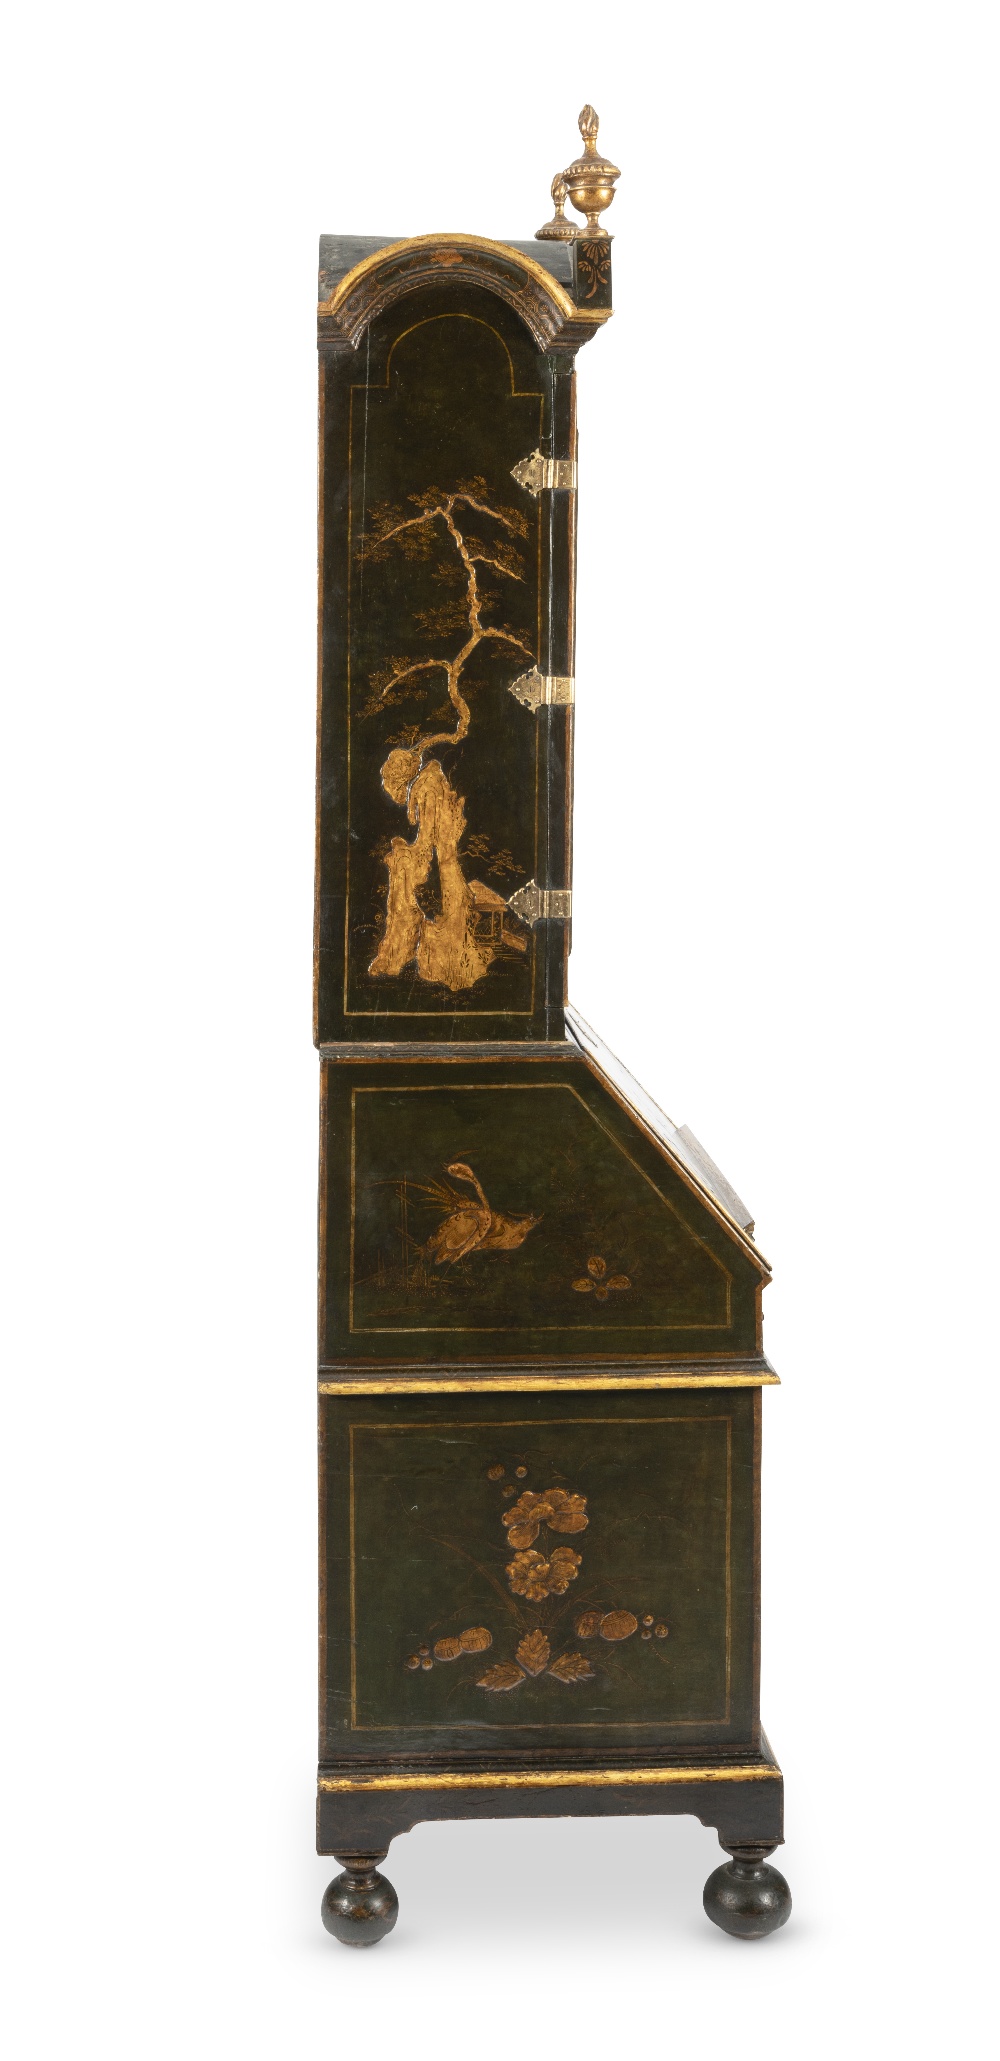 A fine and rare George I dark green and gilt japanned bureau-cabinetIn the manner of John Belchie... - Image 6 of 7